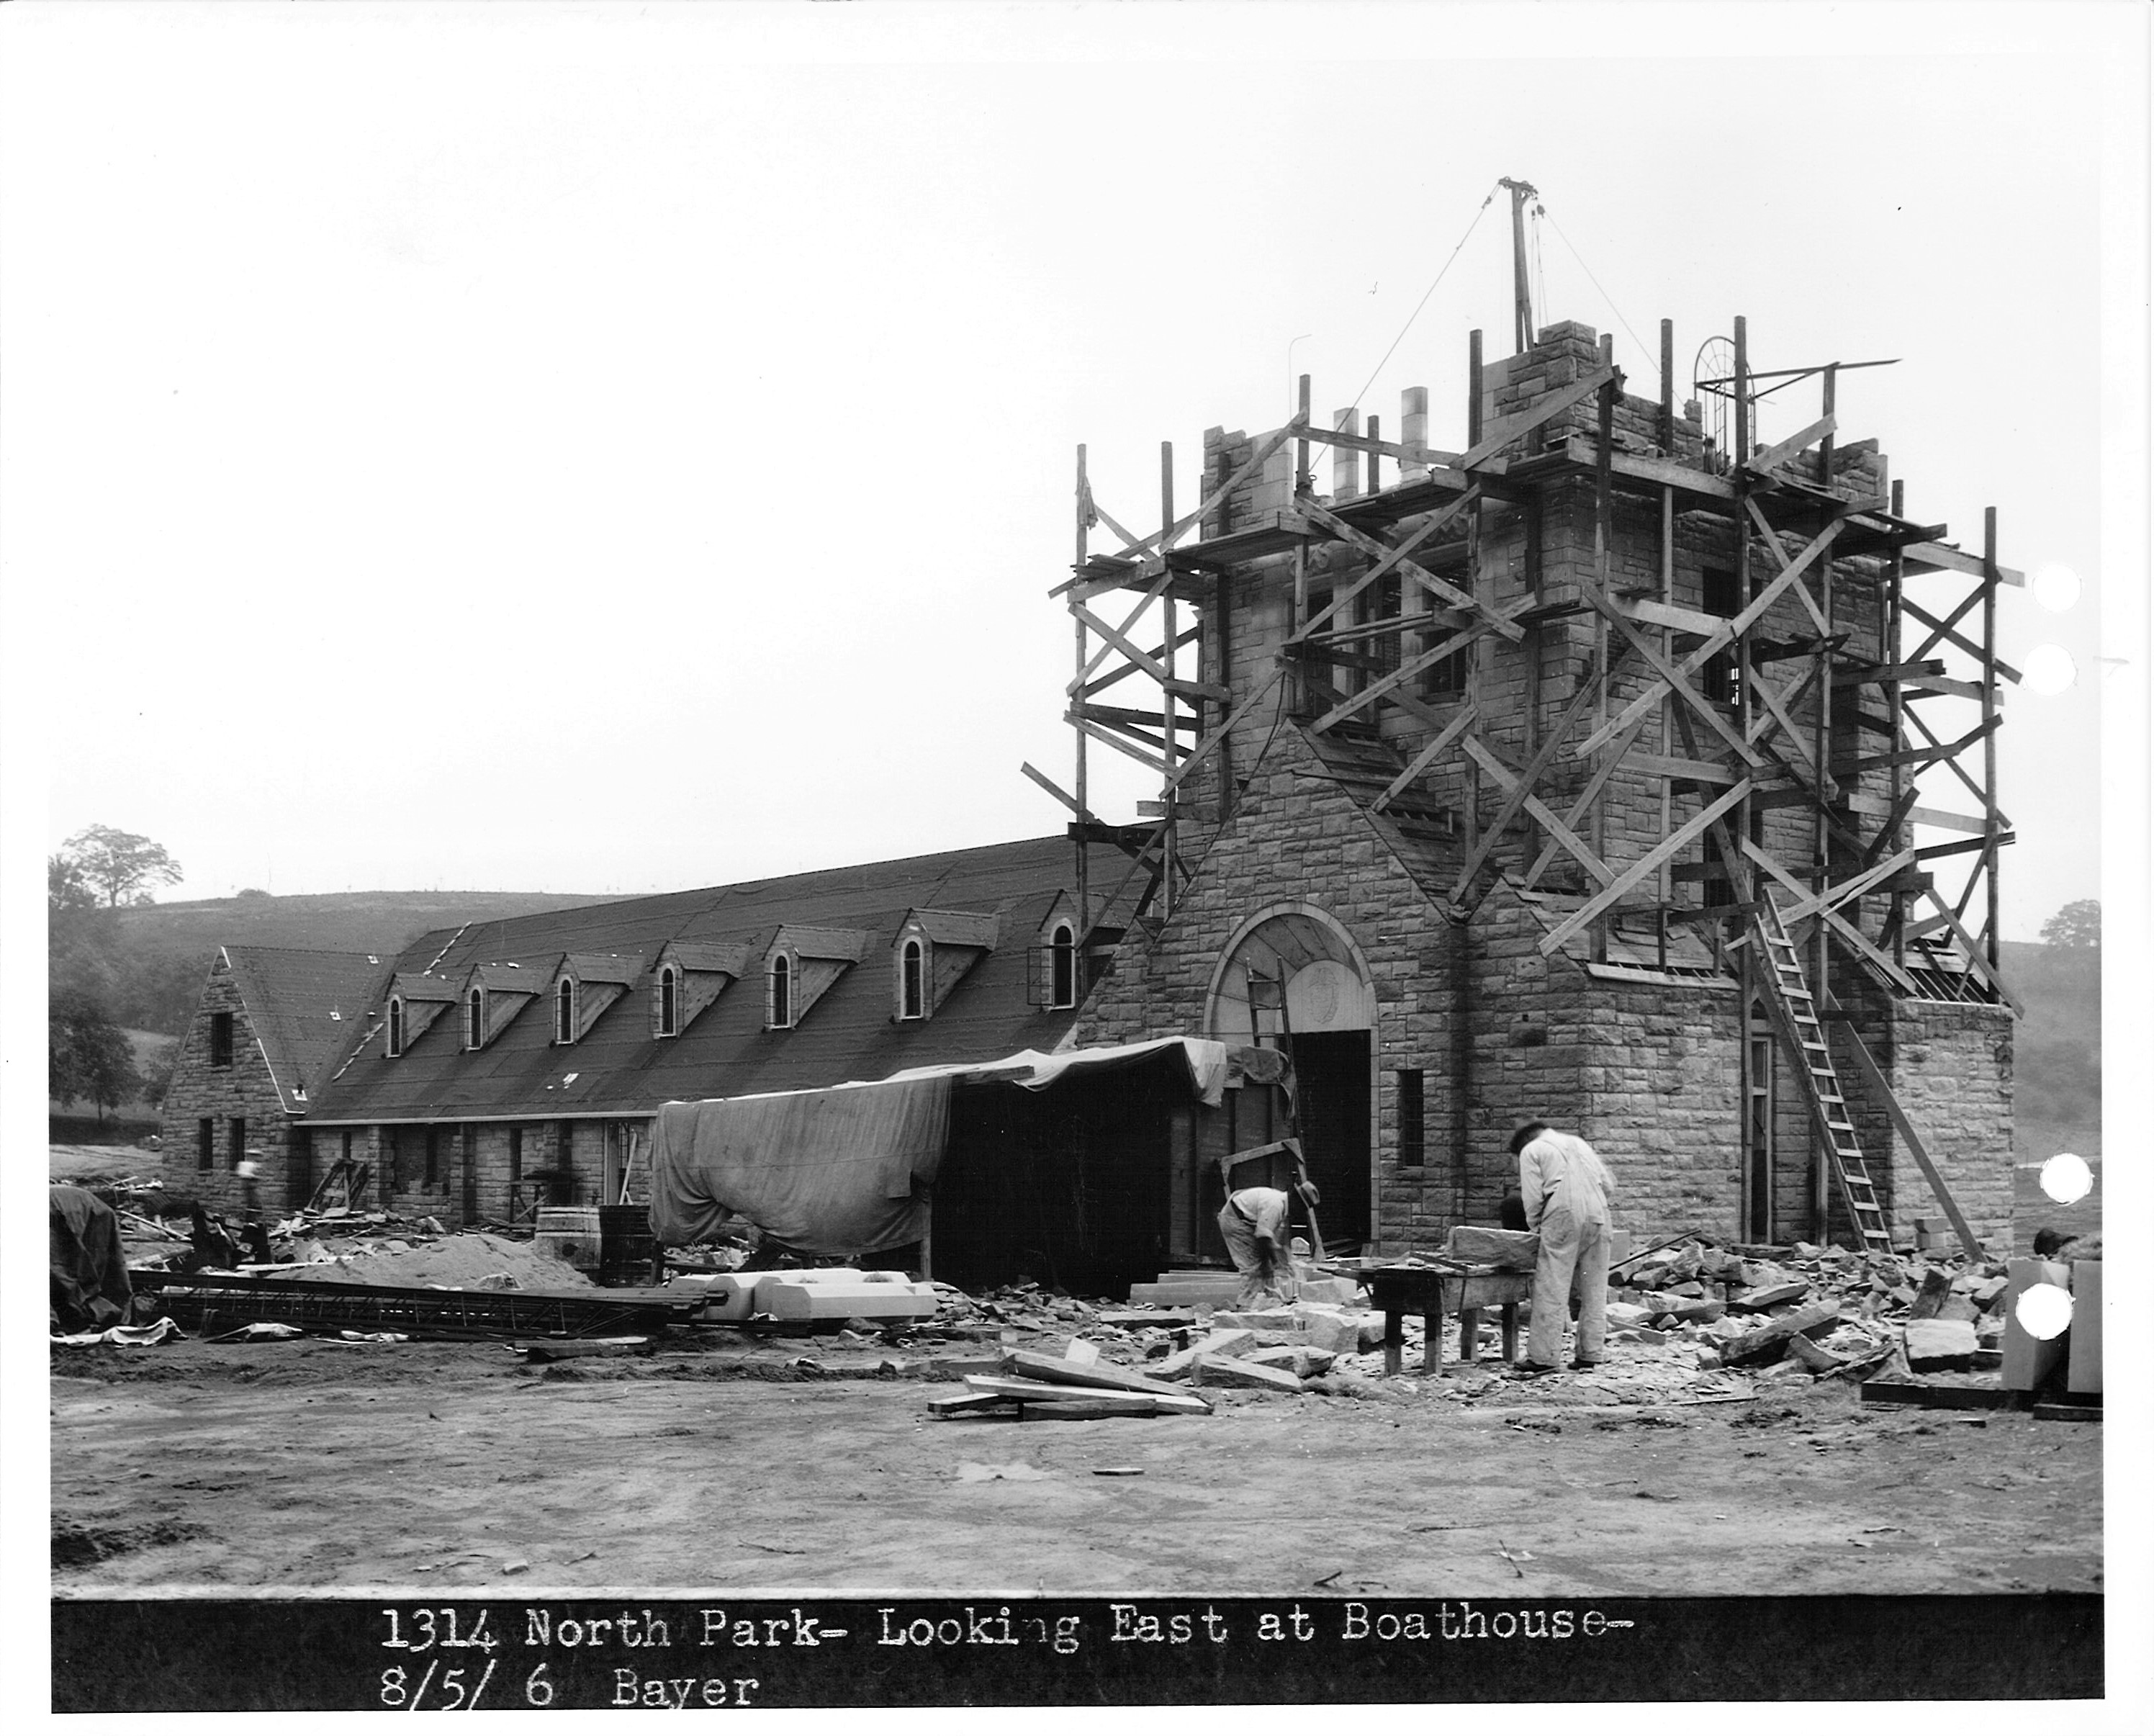 Boat House of North Park in construction